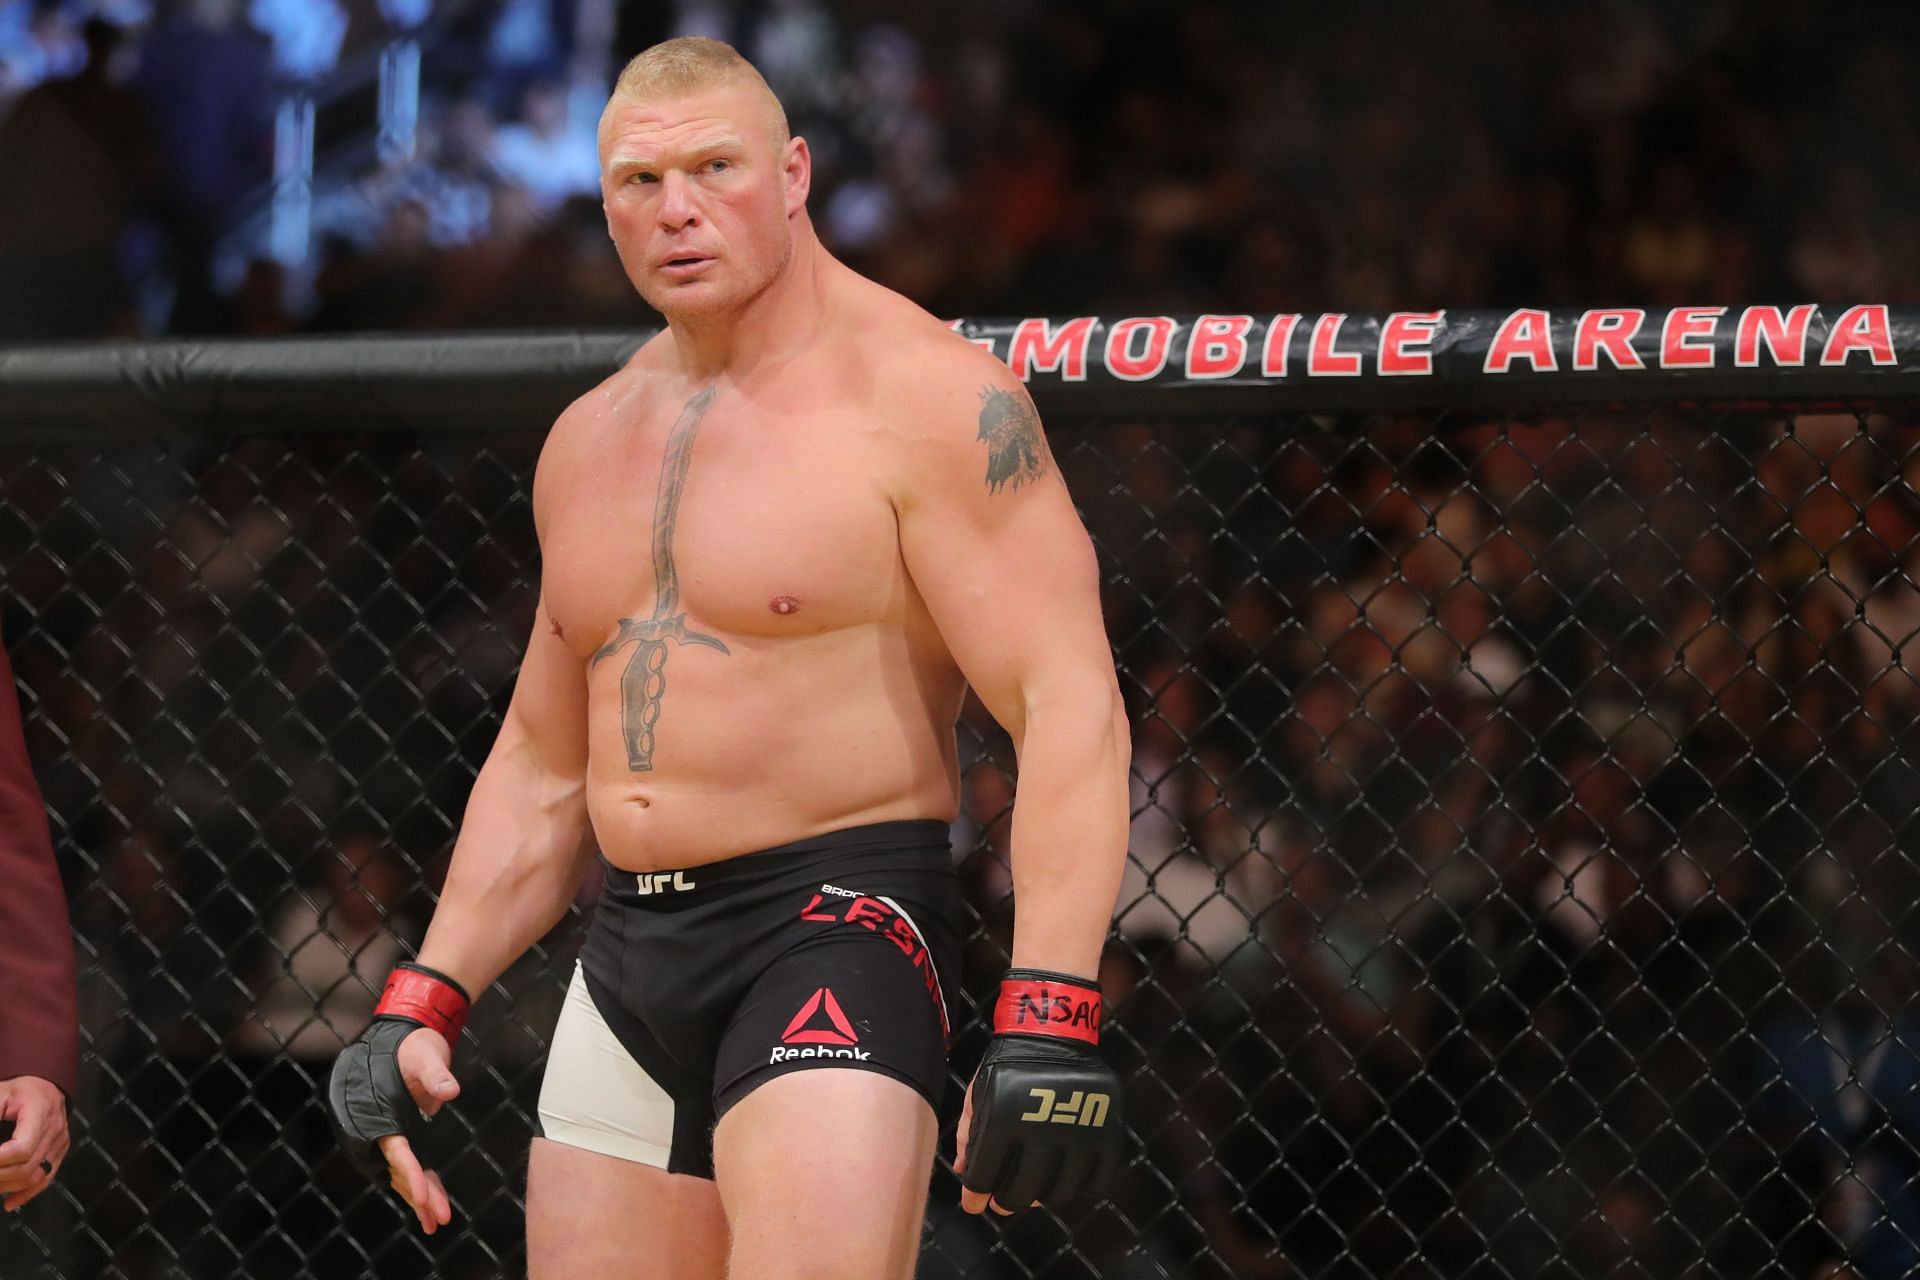 Overeem defeated Lesnar via first-round TKO